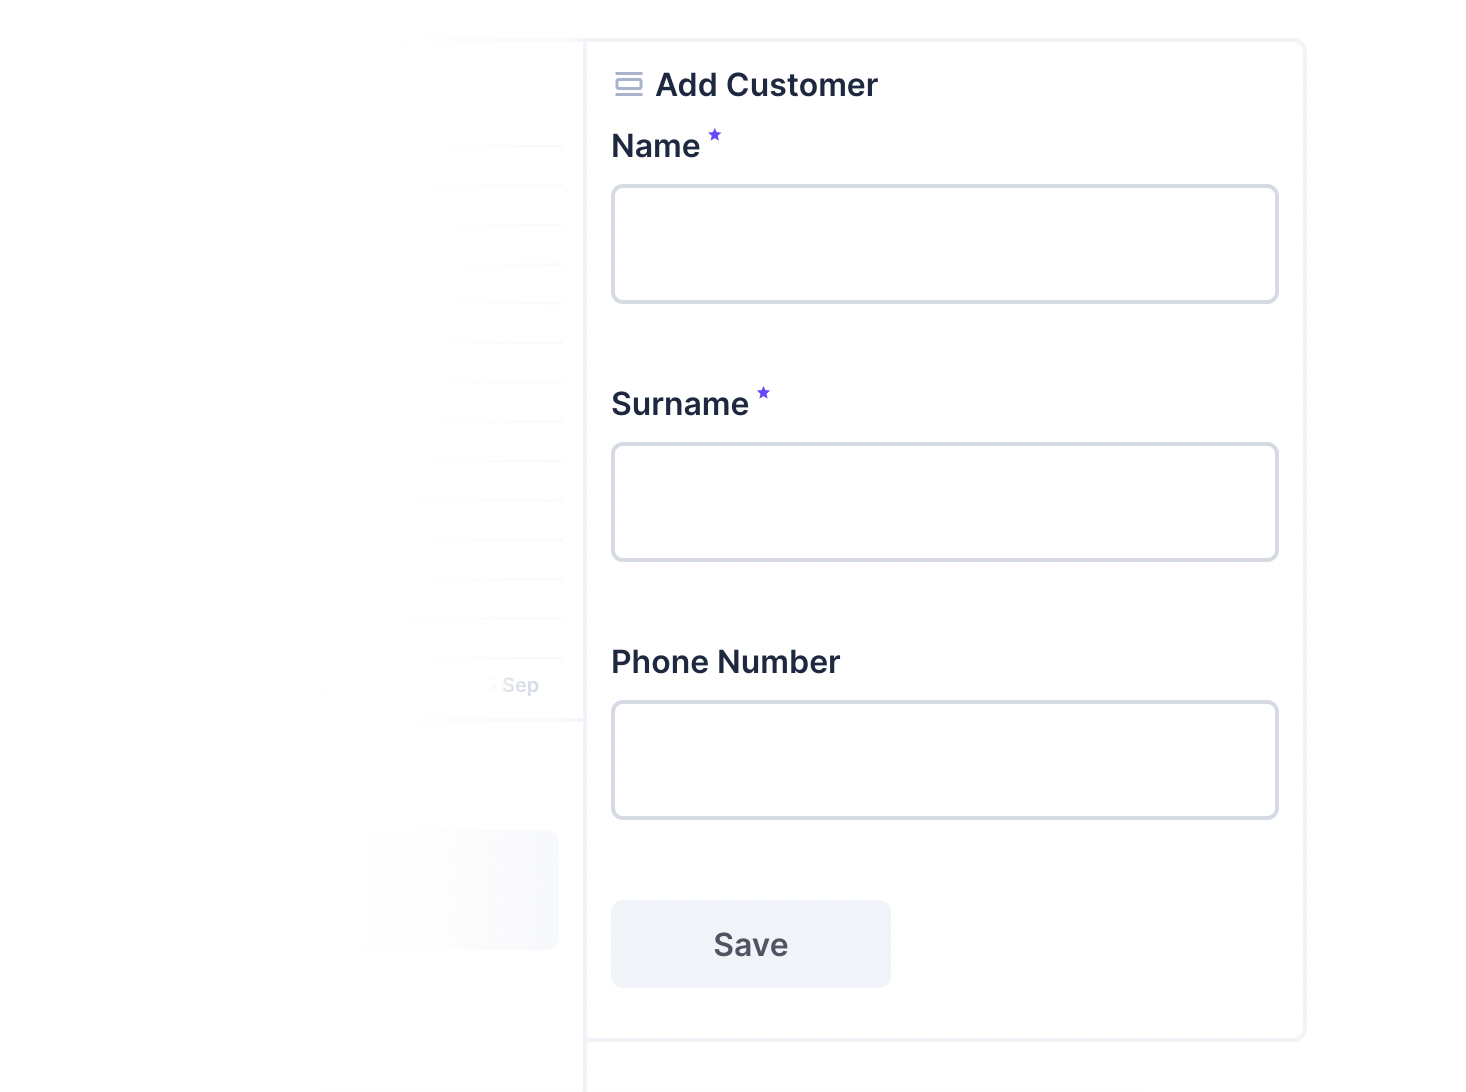 A panel shows a form called Add Customer. It has a name, surname, and phone number text input.